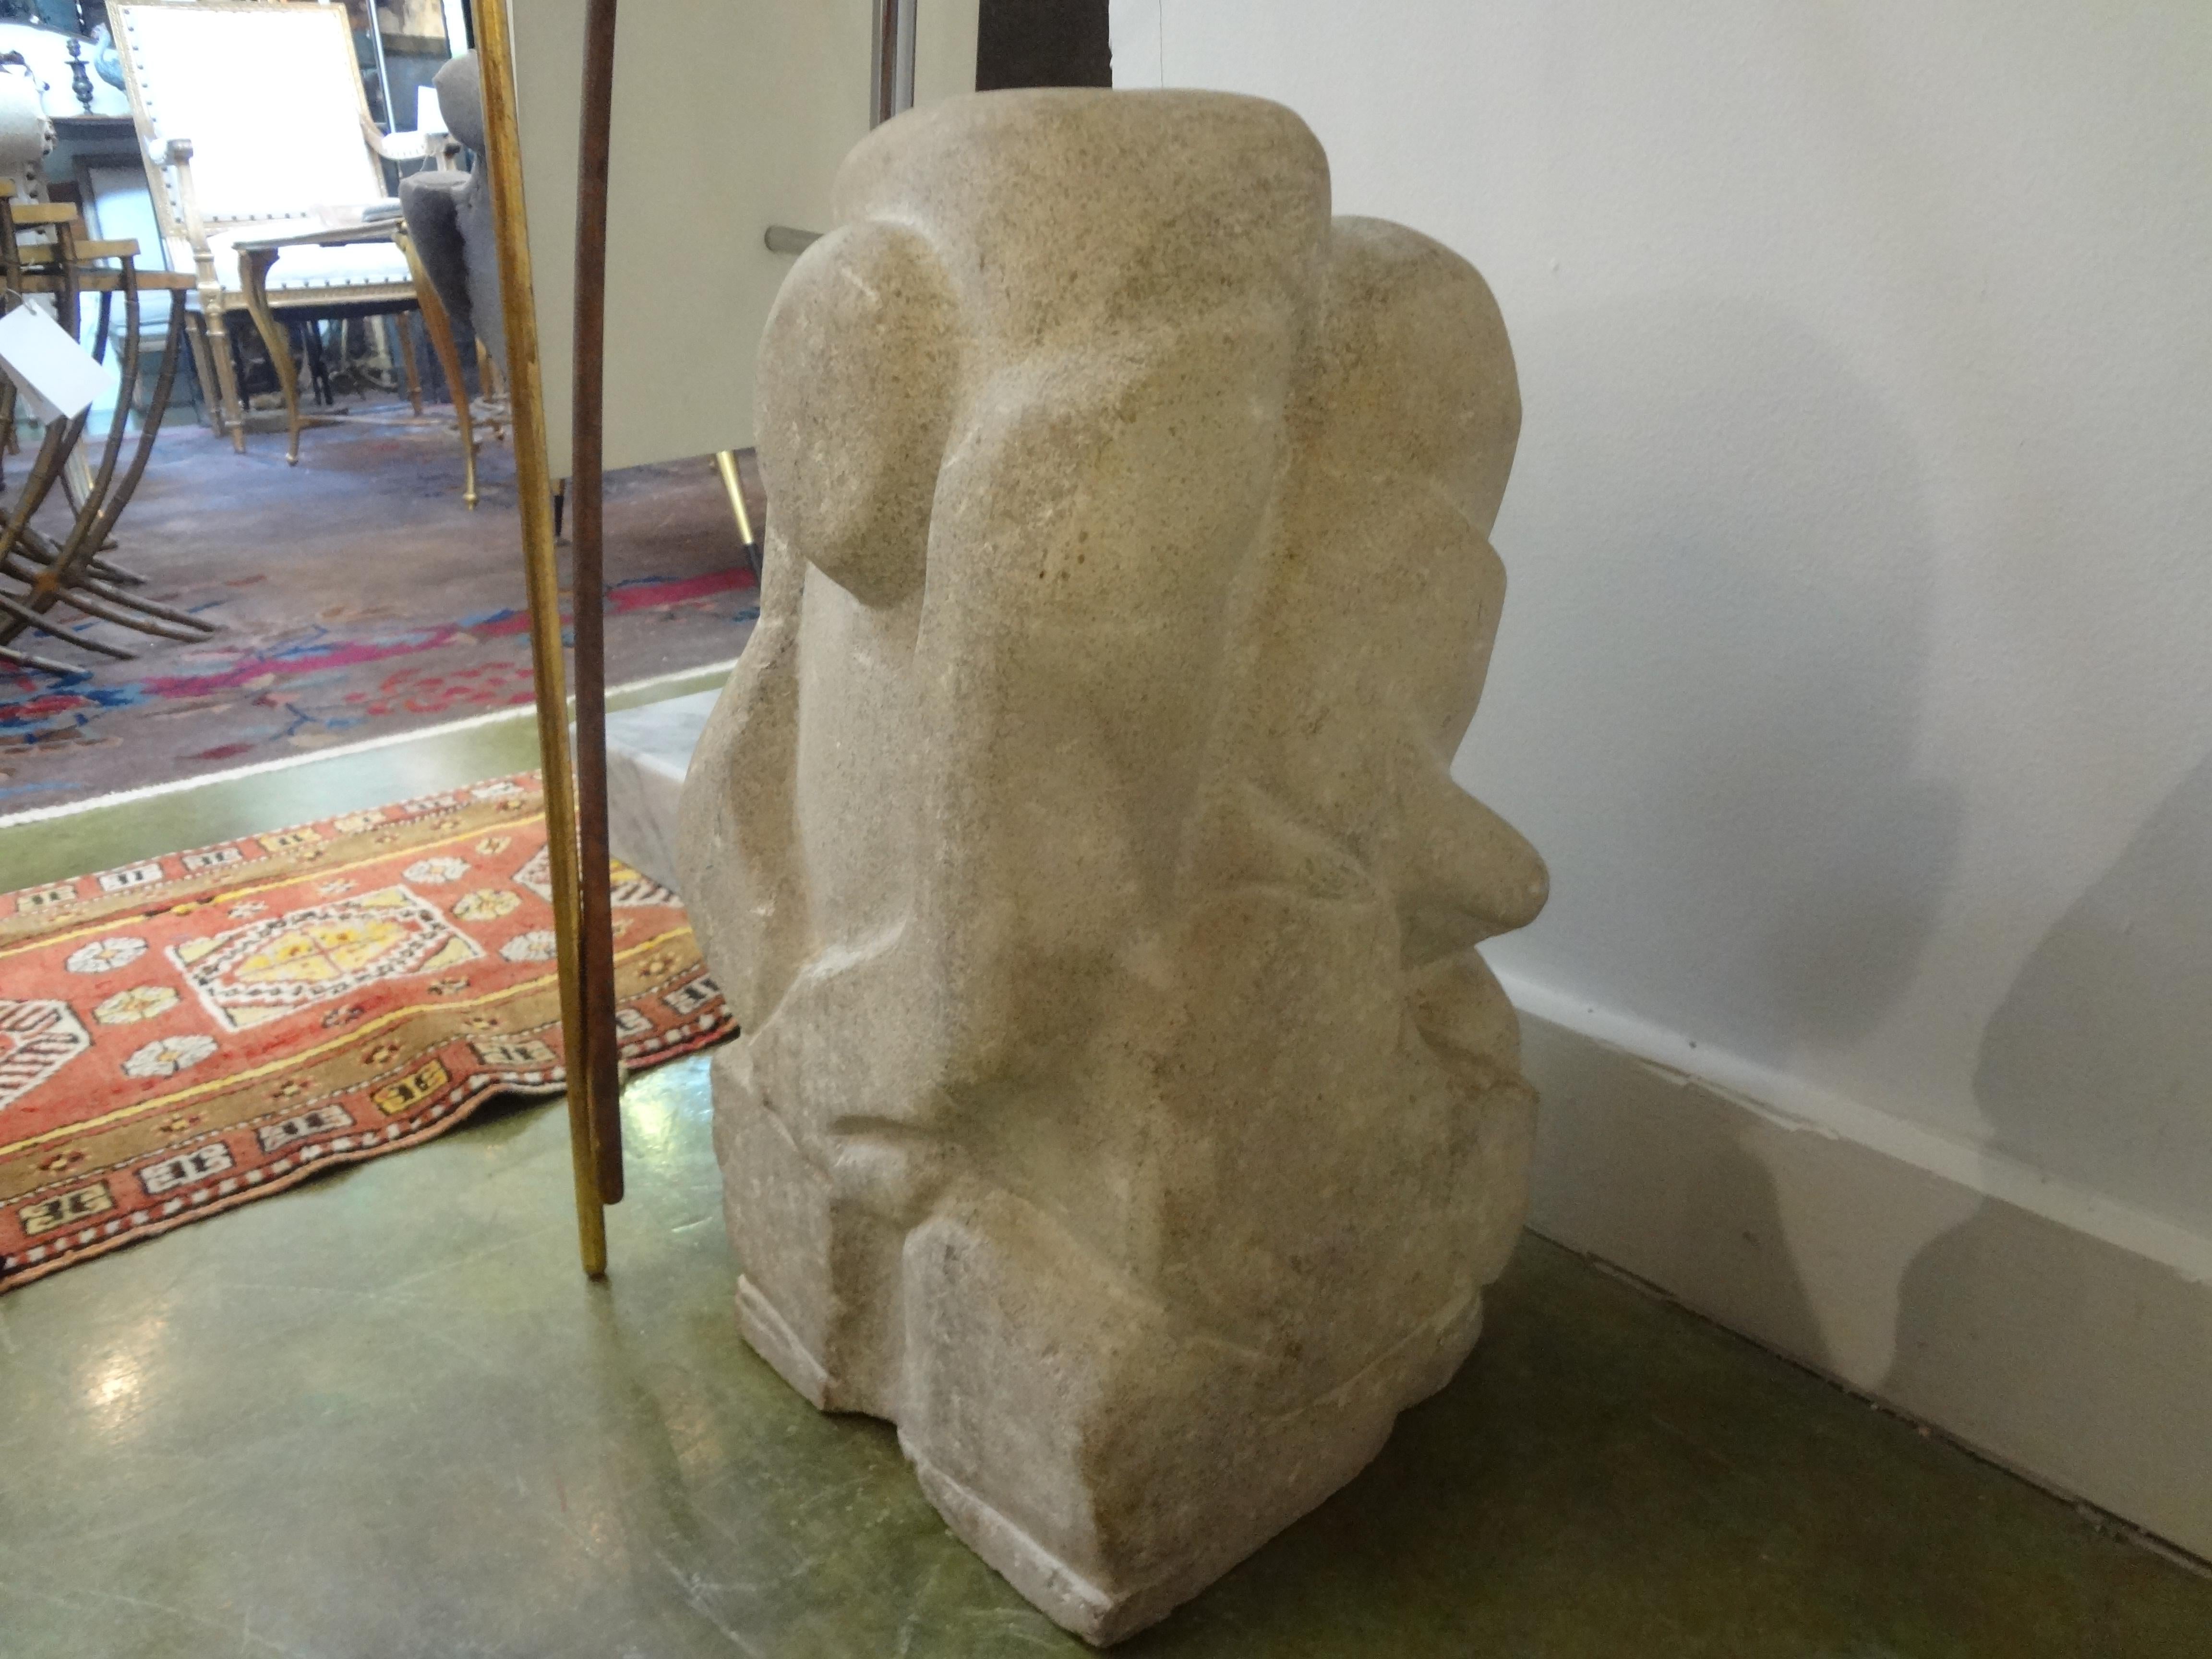 Mid-Century Modern abstract granite sculpture.
Well executed Mid-Century Modern granite or marble abstract sculpture after Rene Brancusi. This fabulous stone sculpture has been carved on all sides and can be viewed and appreciated at every angle.